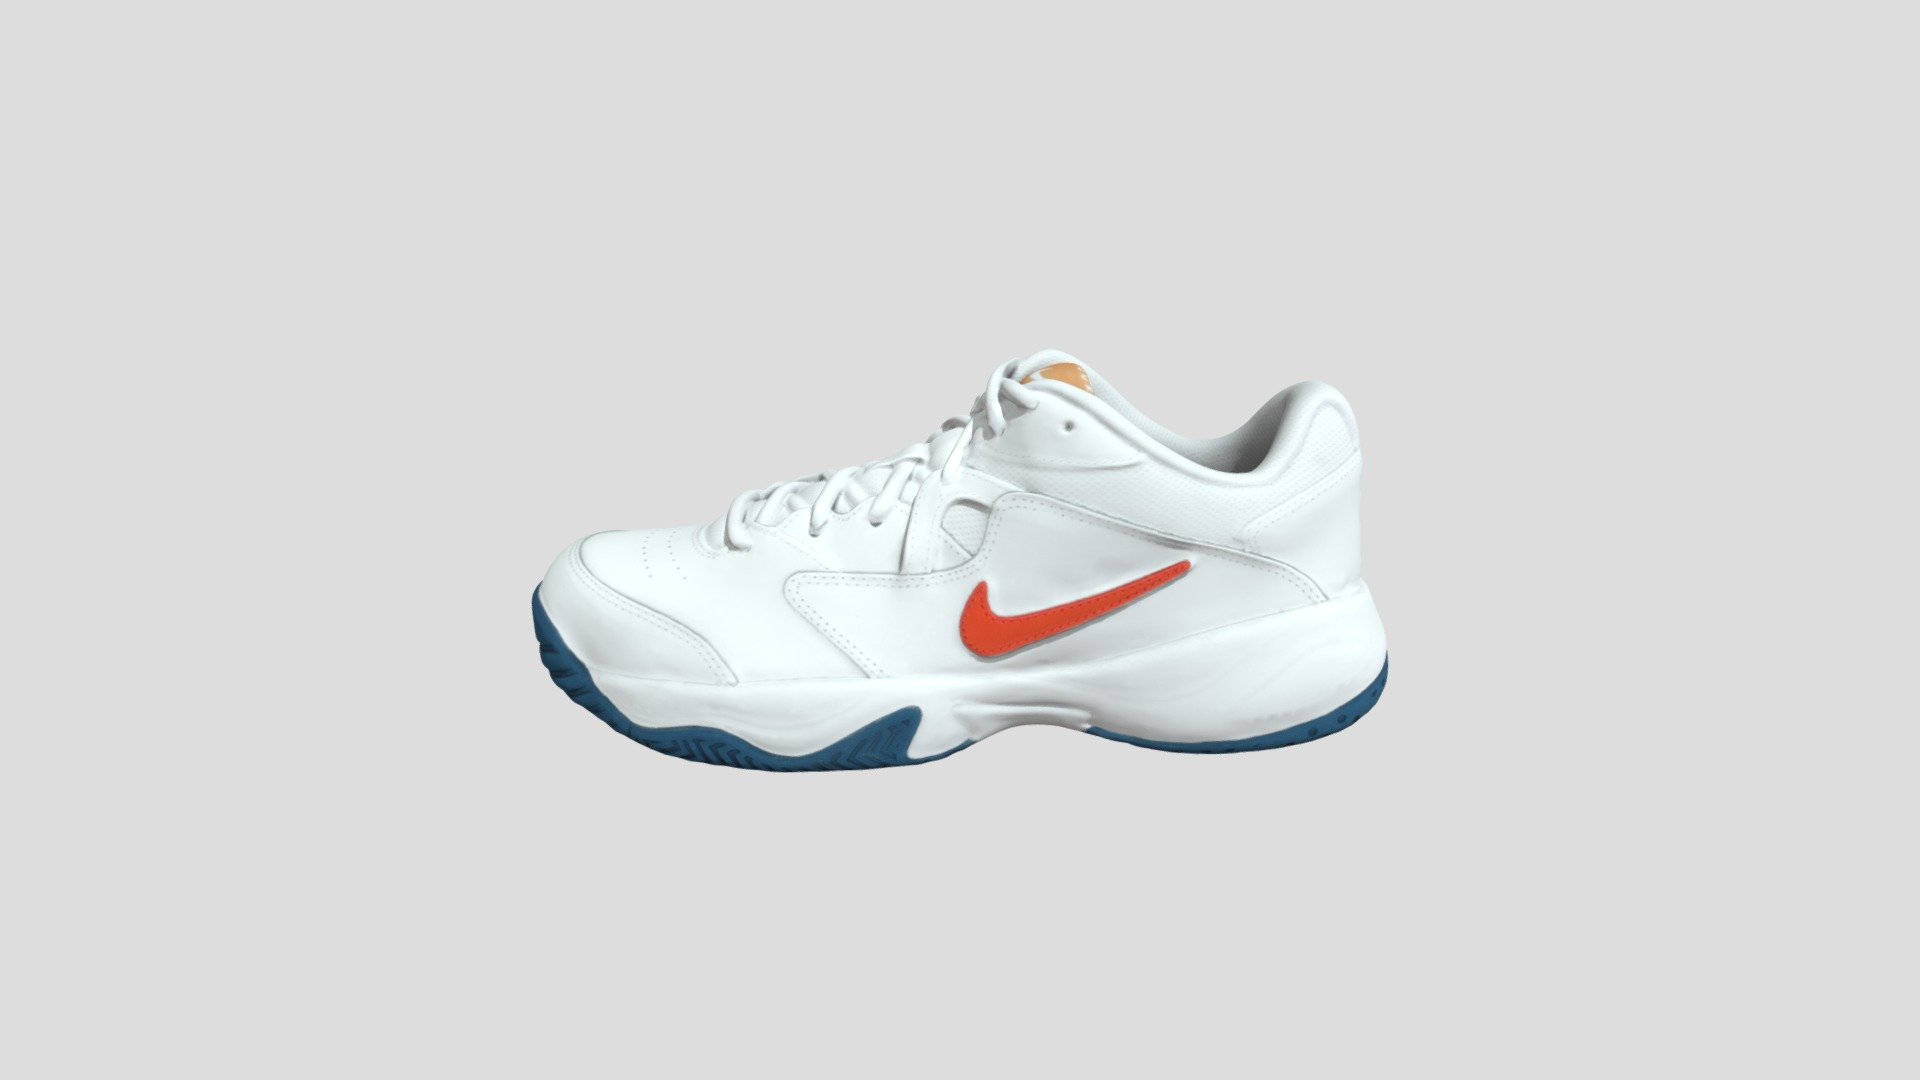 This model was created firstly by 3D scanning on retail version, and then being detail-improved manually, thus a 1:1 repulica of the original
PBR ready
Low-poly
4K texture
Welcome to check out other models we have to offer. And we do accept custom orders as well :) - Nike Court Lite 2 白橙蓝_AR8836-105 - Buy Royalty Free 3D model by TRARGUS 3d model